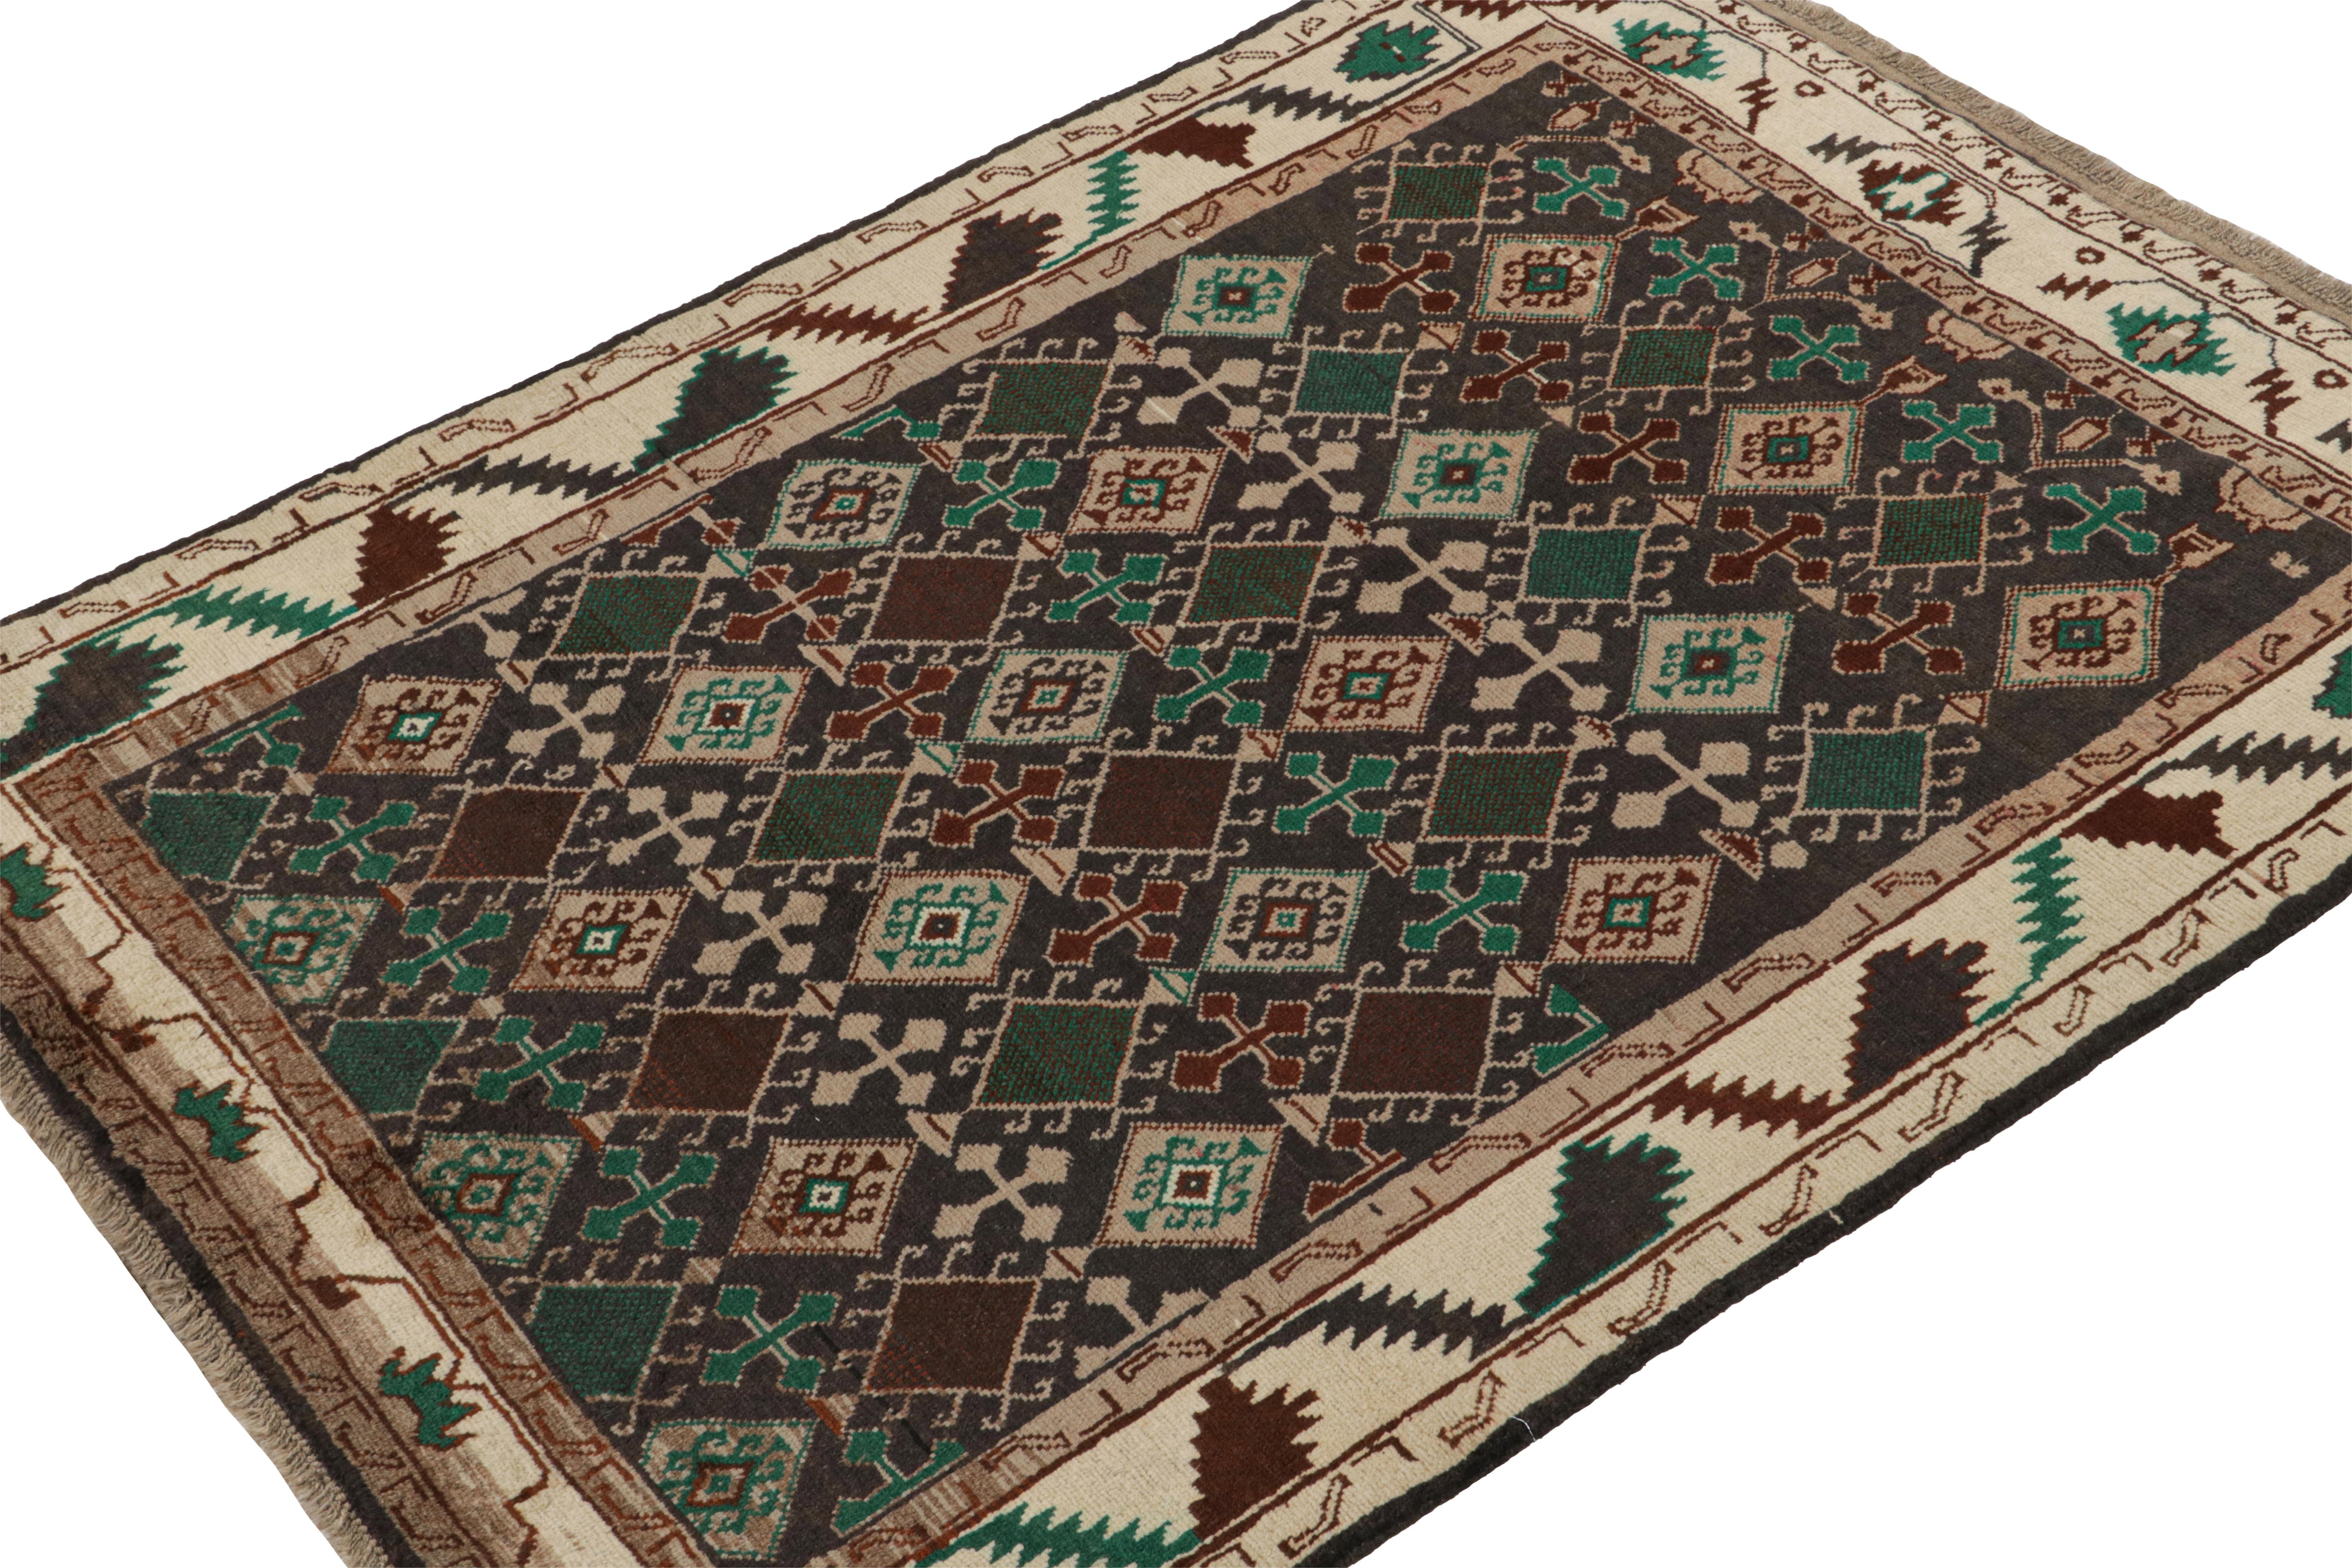 Inspired by Oushak rugs, this 5x6 rug is the latest to join Rug & Kilim’s Modern Classics collection. 

Hand-knotted in wool, its design plays rich brown with teal and forest green in diamonds and other geometric patterns in a tribal style. 